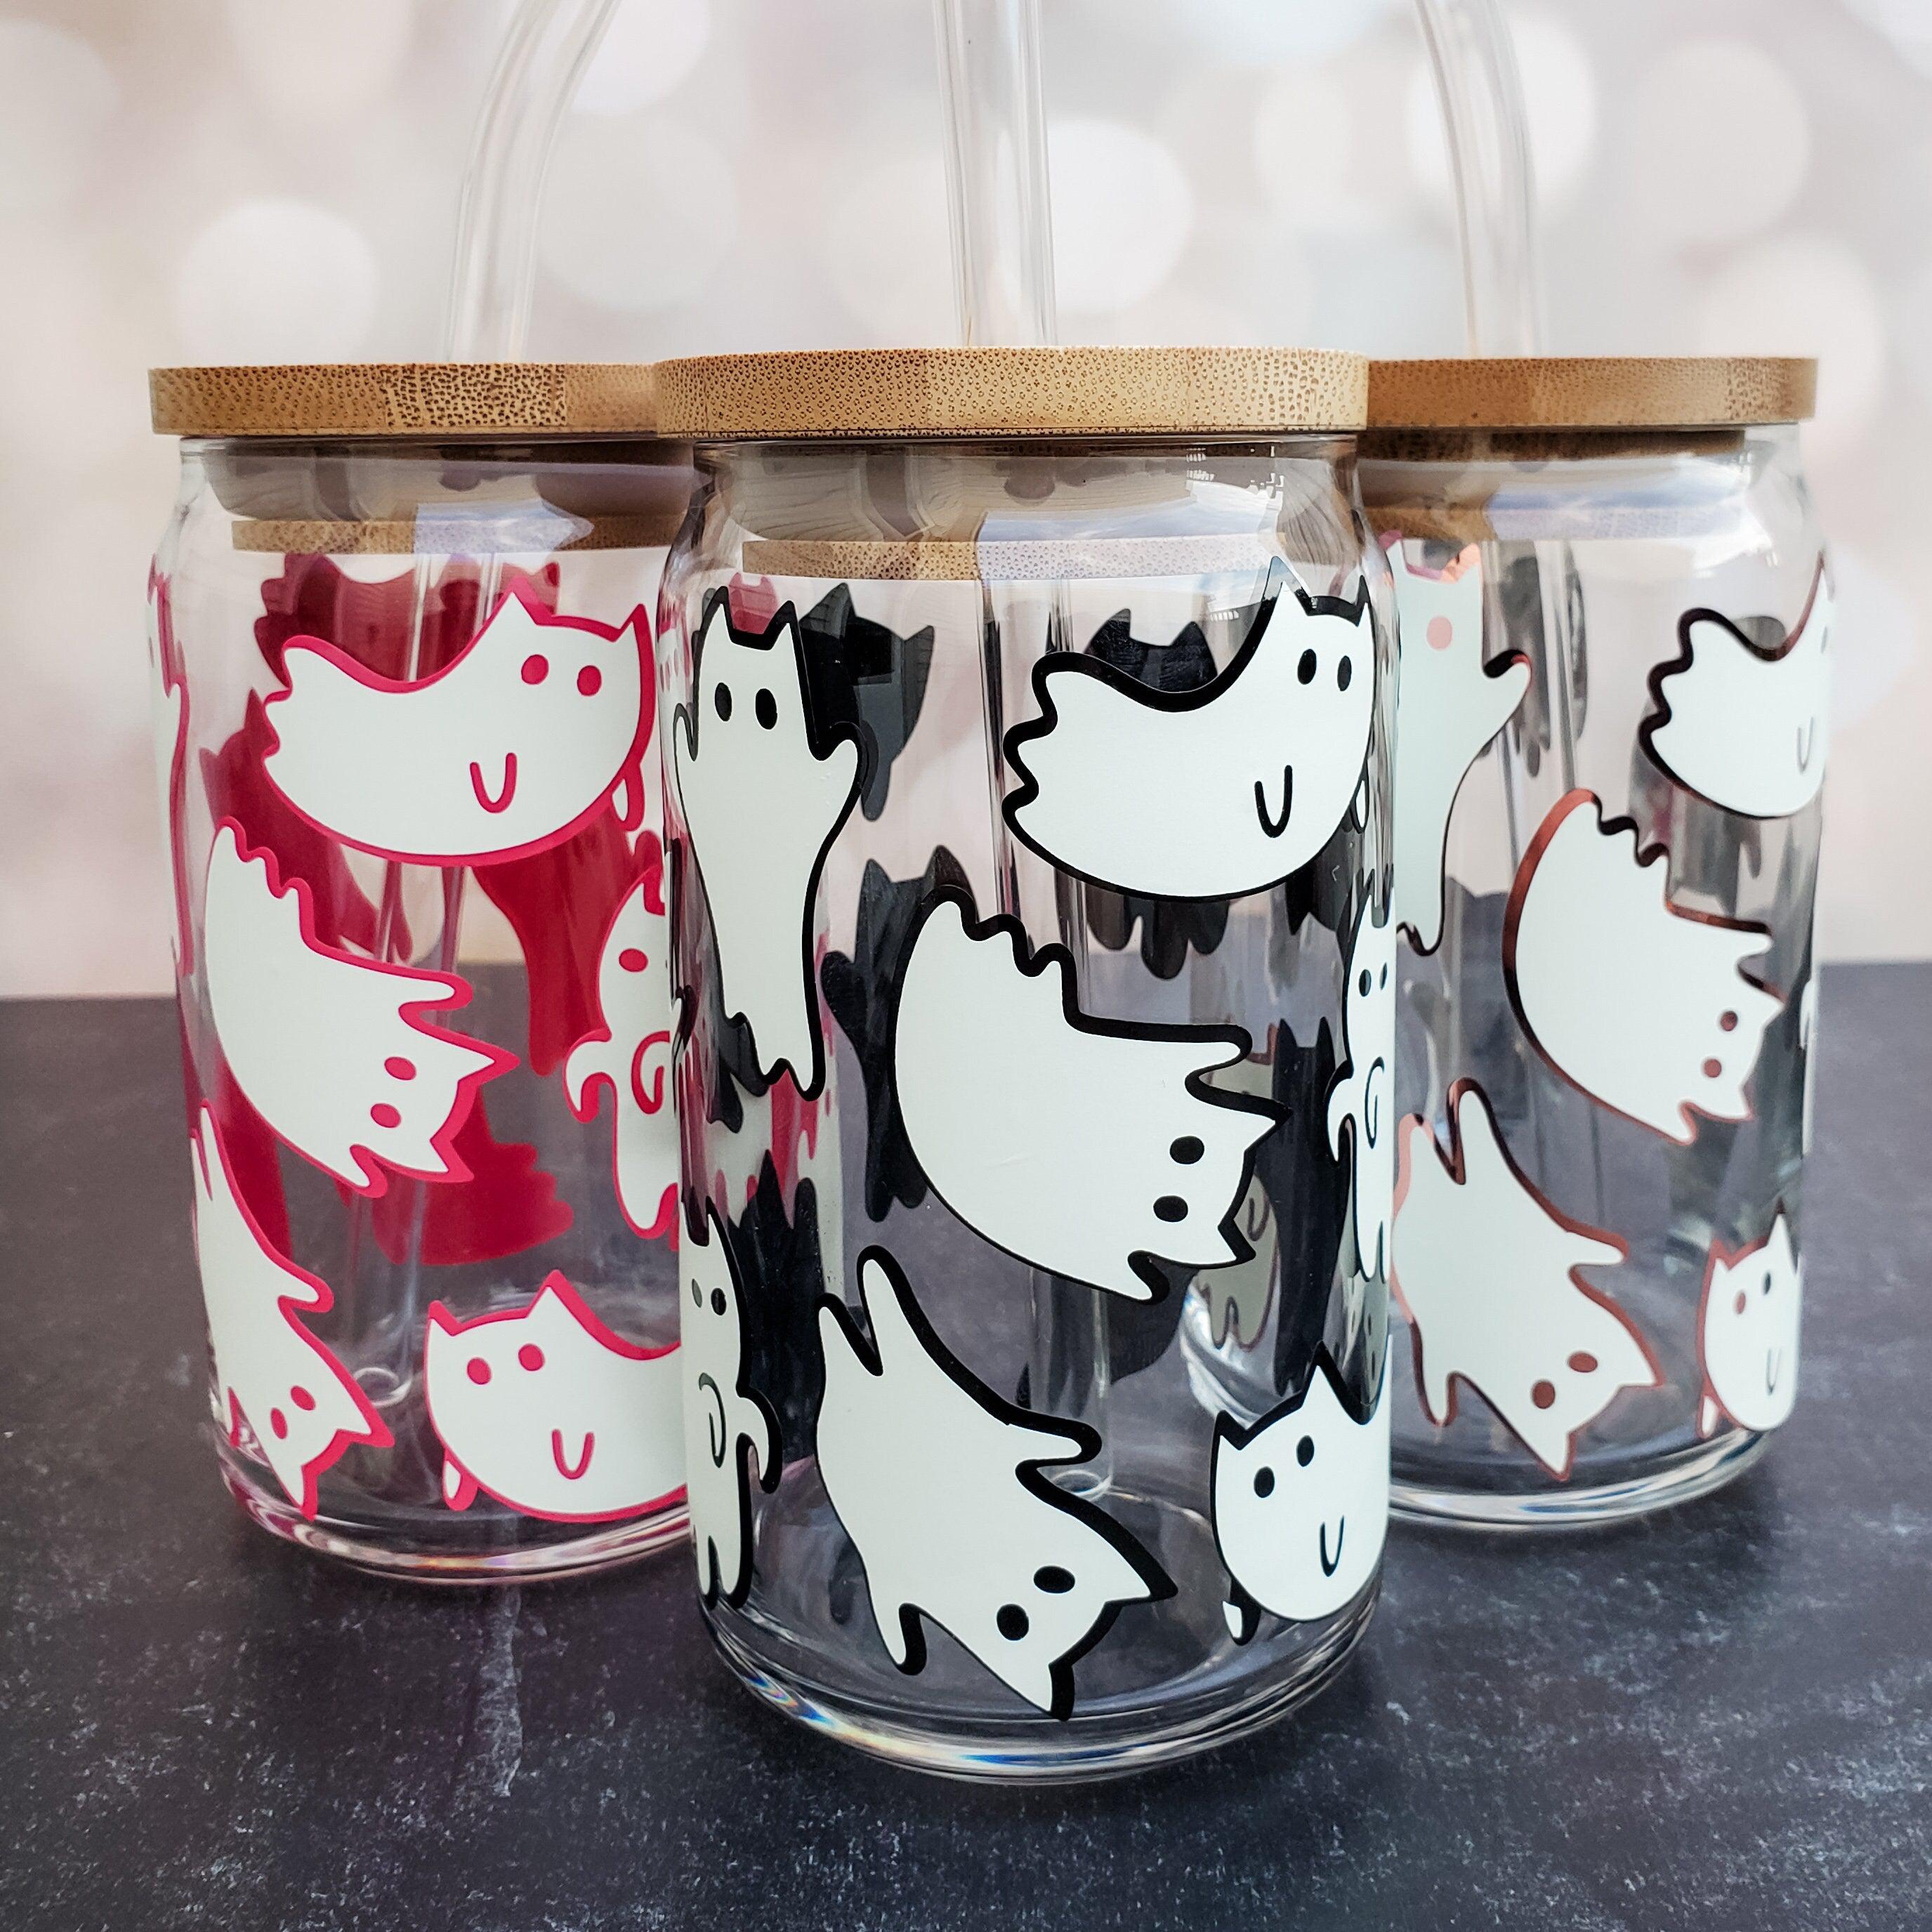 Cat Ghosts Glow in the Dark Iced Coffee Cup - Cute Kitty Halloween Beer Can Glass - Friendly Ghosts Halloween Party Cup -Gift for Cat Lover